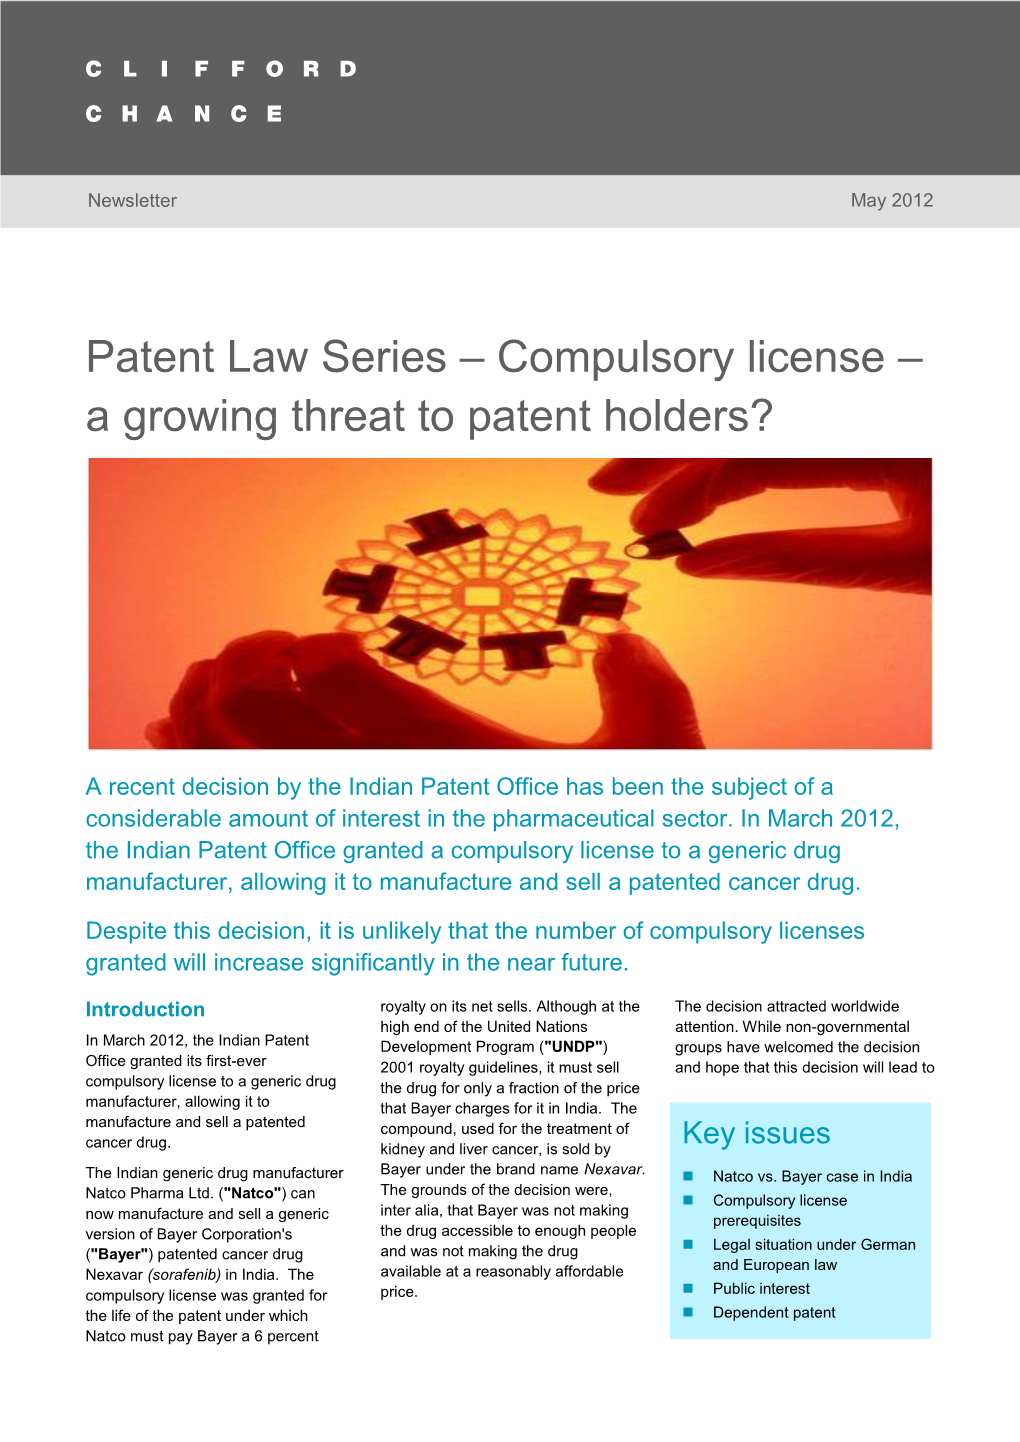 Patent Law Series – Compulsory License – a Growing Threat to Patent Holders? 1